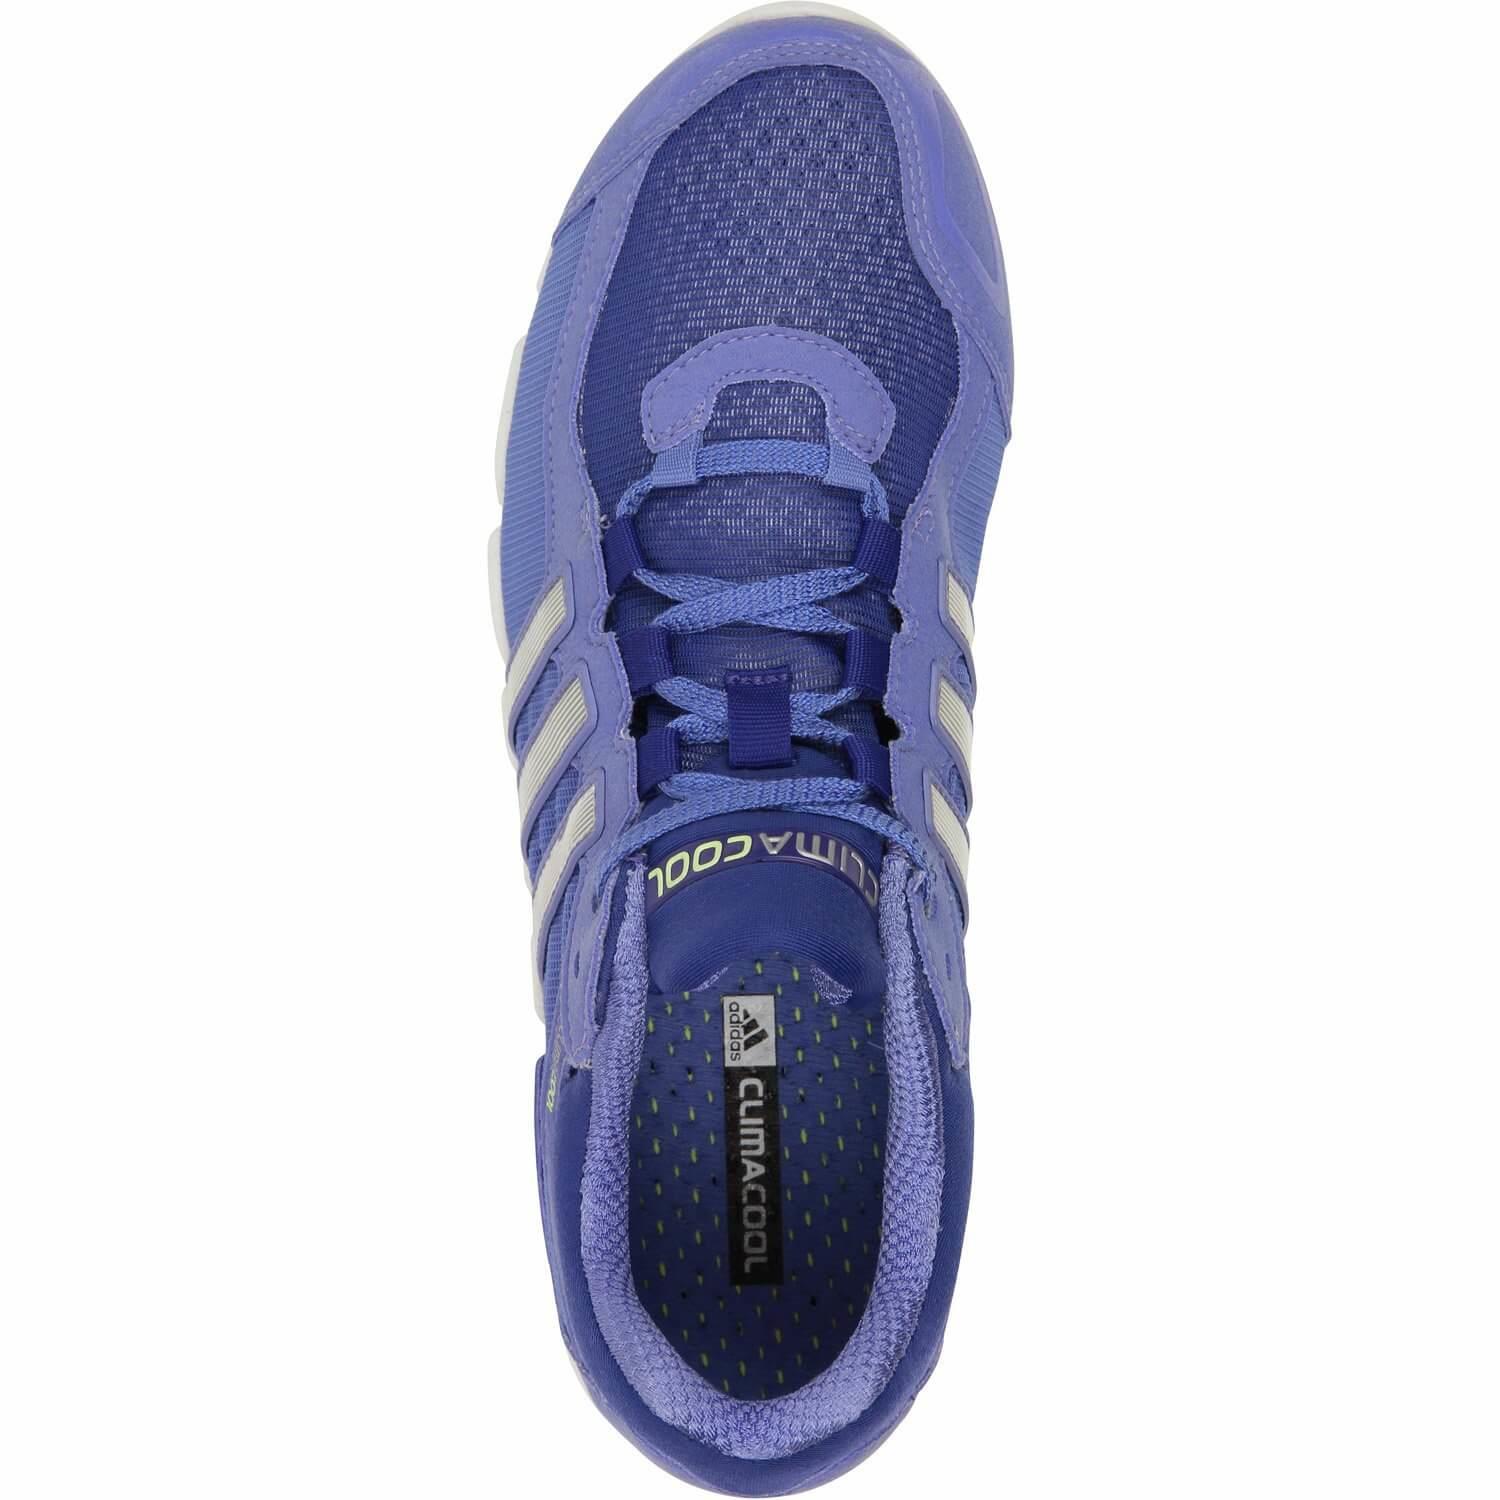 The Adidas Climacool Freshride has a breathable upper and secure lacing system